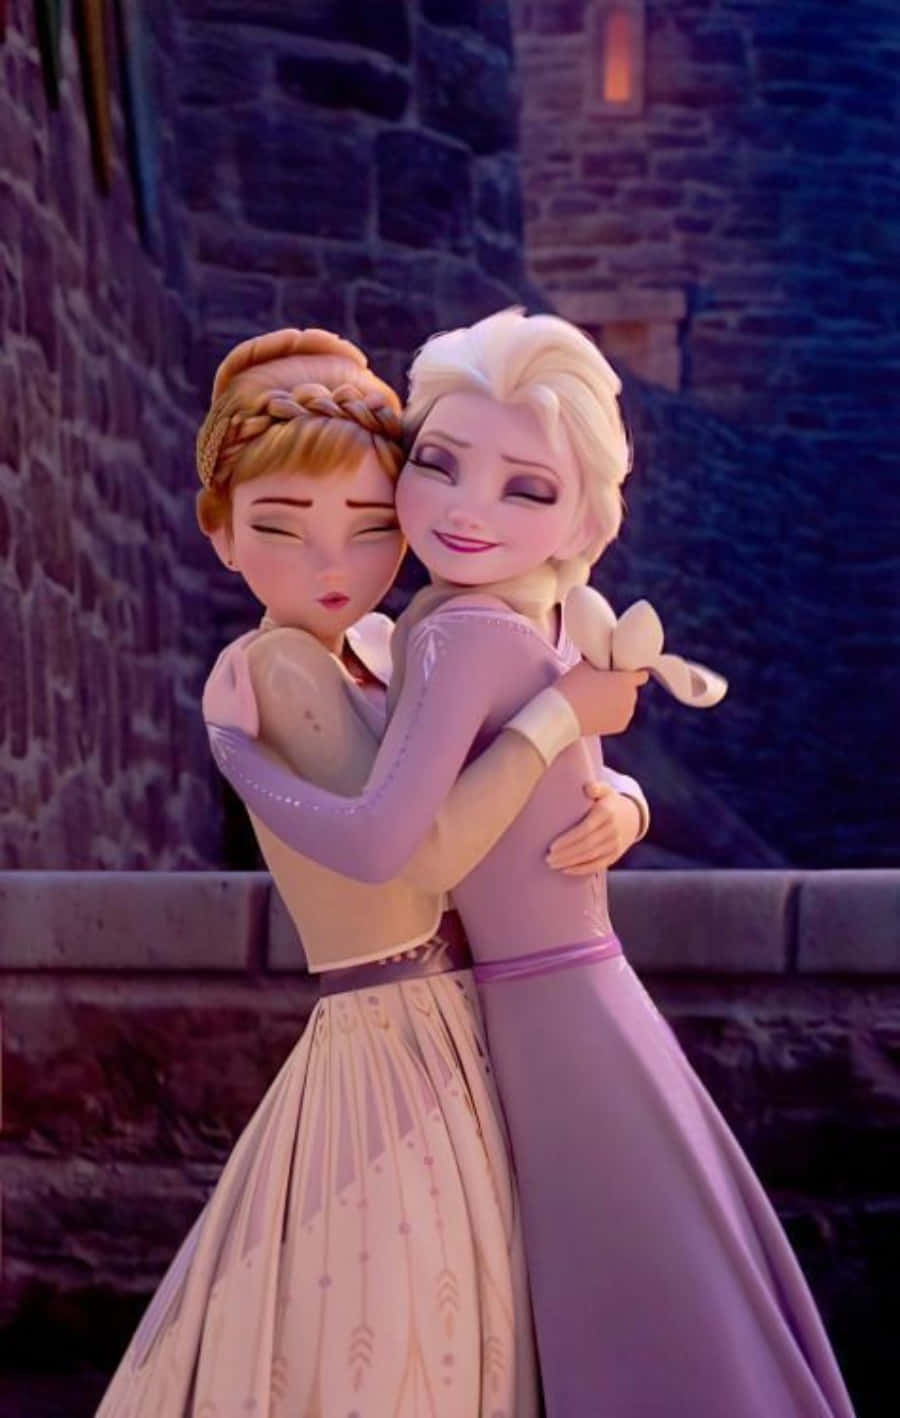 Sisters Elsa and Anna reuniting with love